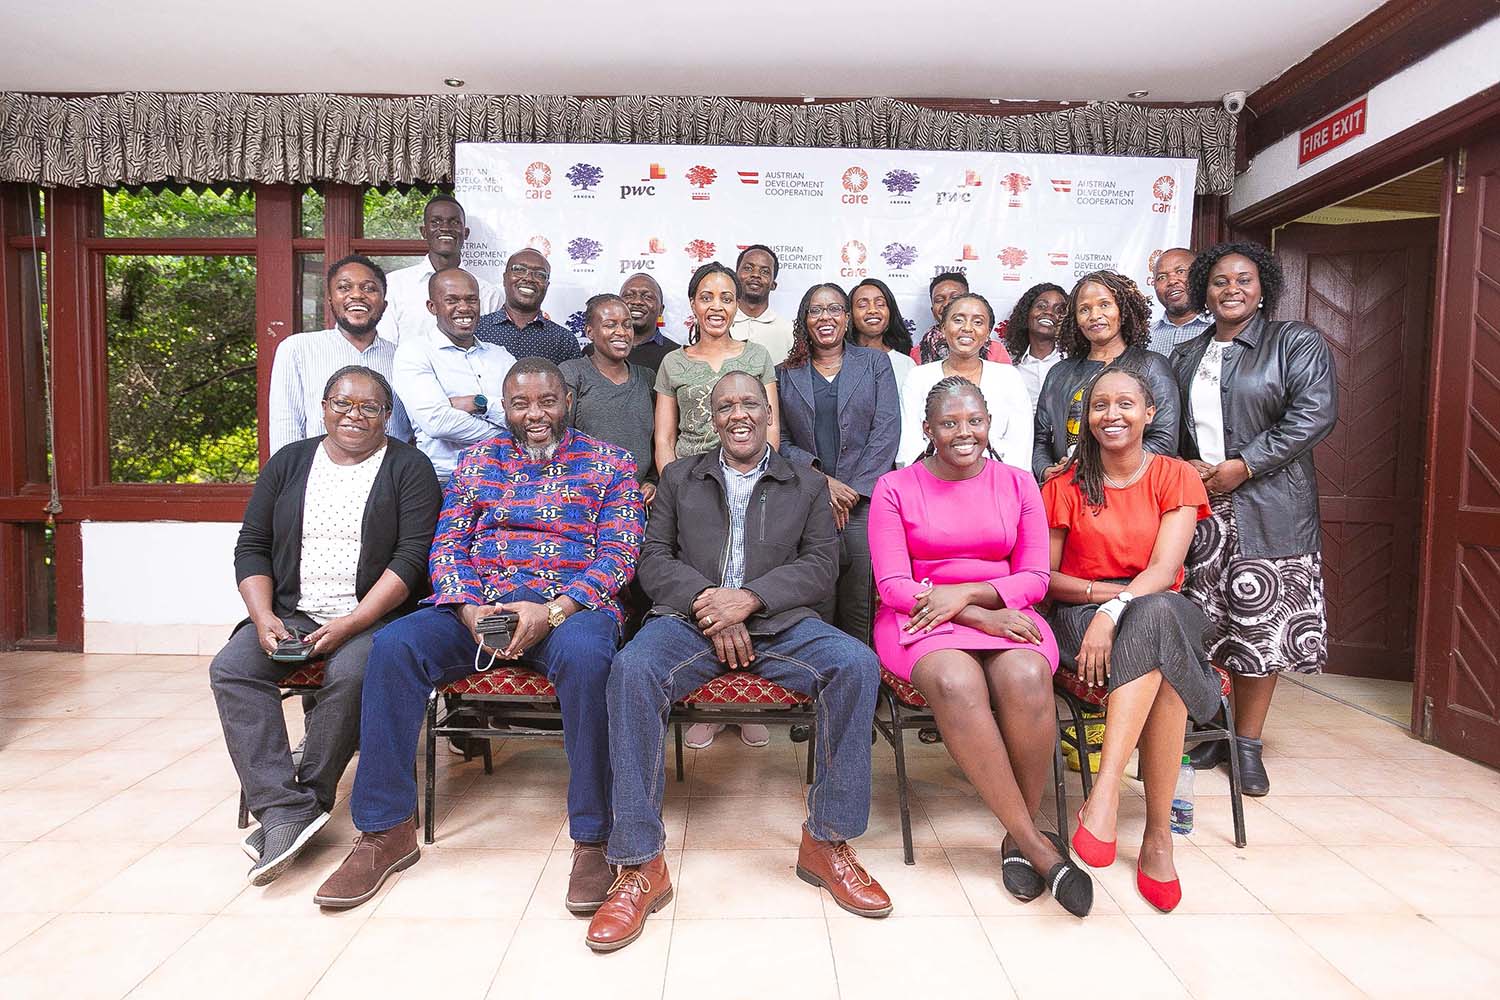 Group picture of participants and organisers of the Ashoka Visionary Program in East Africa. Sitting inside the event location, logos of the supporting organisations in the background.